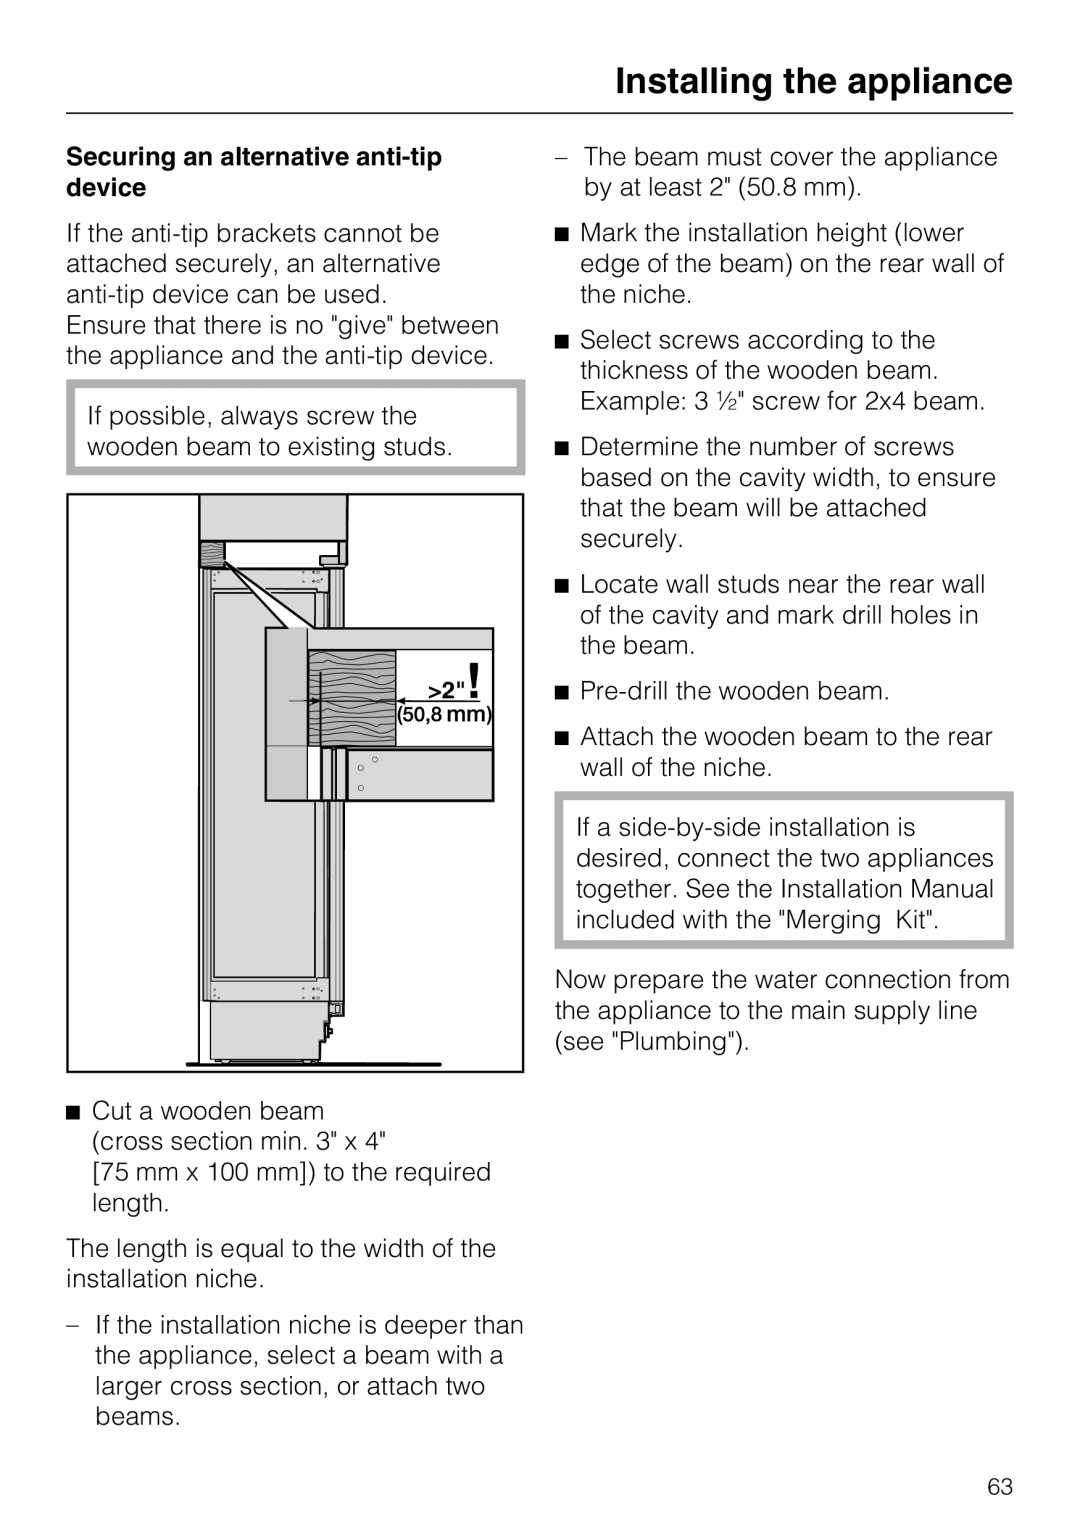 Miele F1471VI installation instructions Installing the appliance, Securing an alternative anti-tip device 